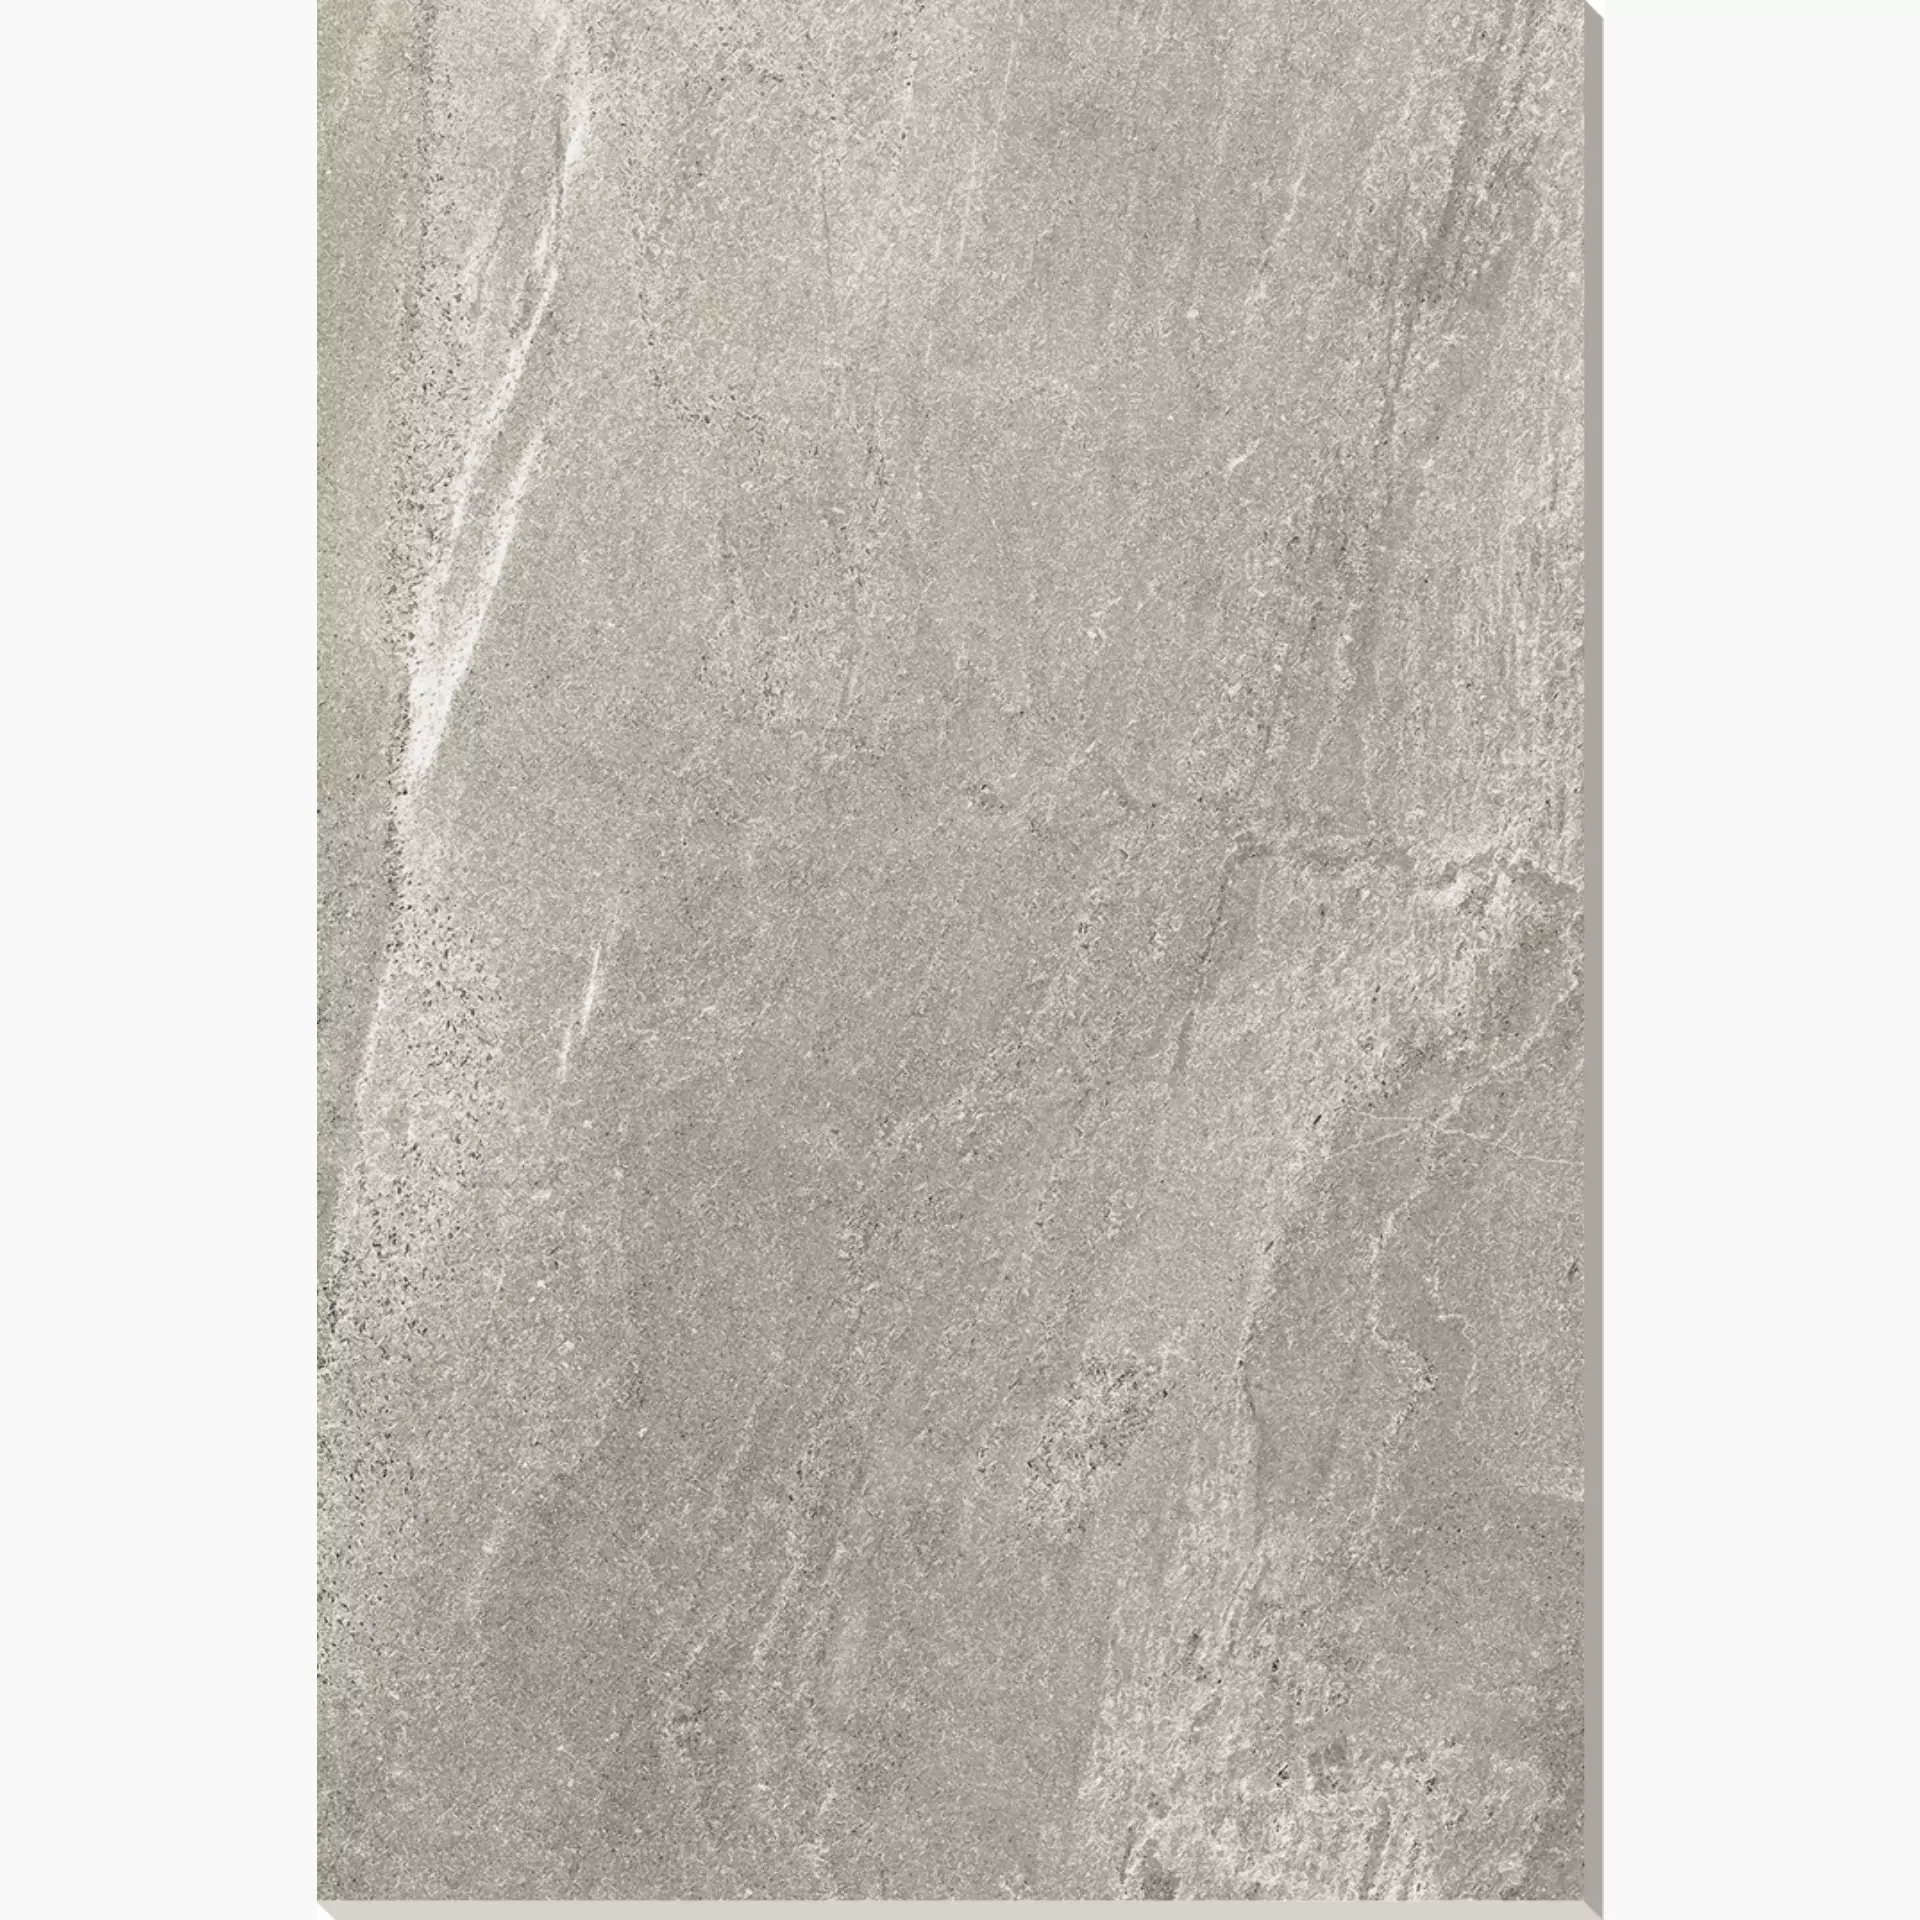 Novabell All Black Grigio Outwalk – Naturale ALK169R 60x90cm rectified 20mm